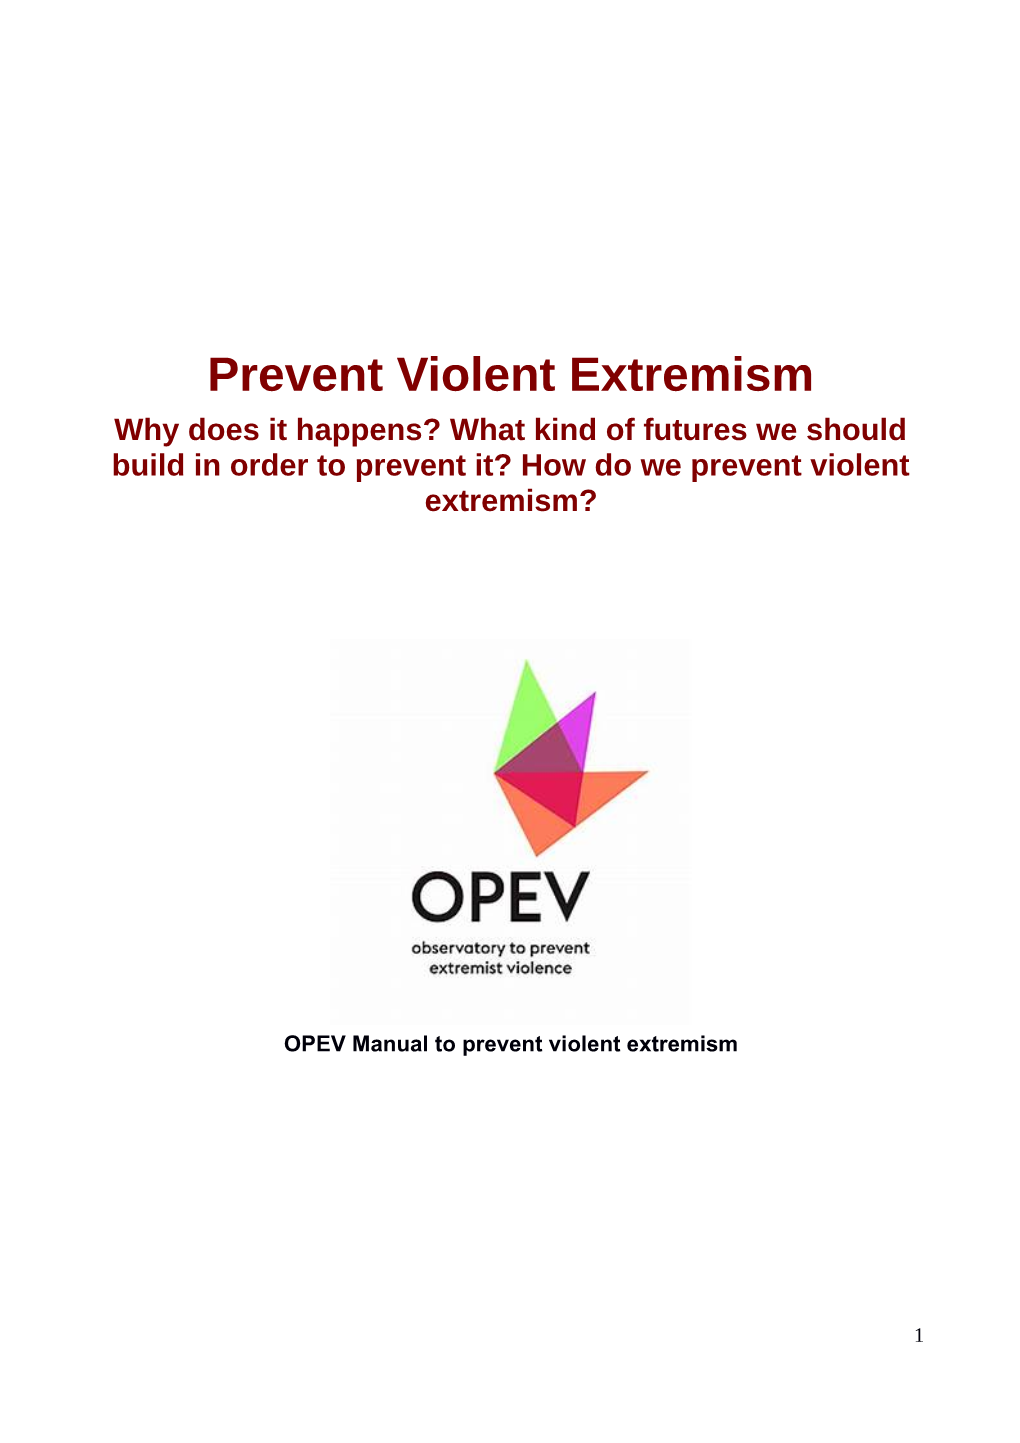 Prevent Violent Extremism Why Does It Happens? What Kind of Futures We Should Build in Order to Prevent It? How Do We Prevent Violent Extremism?